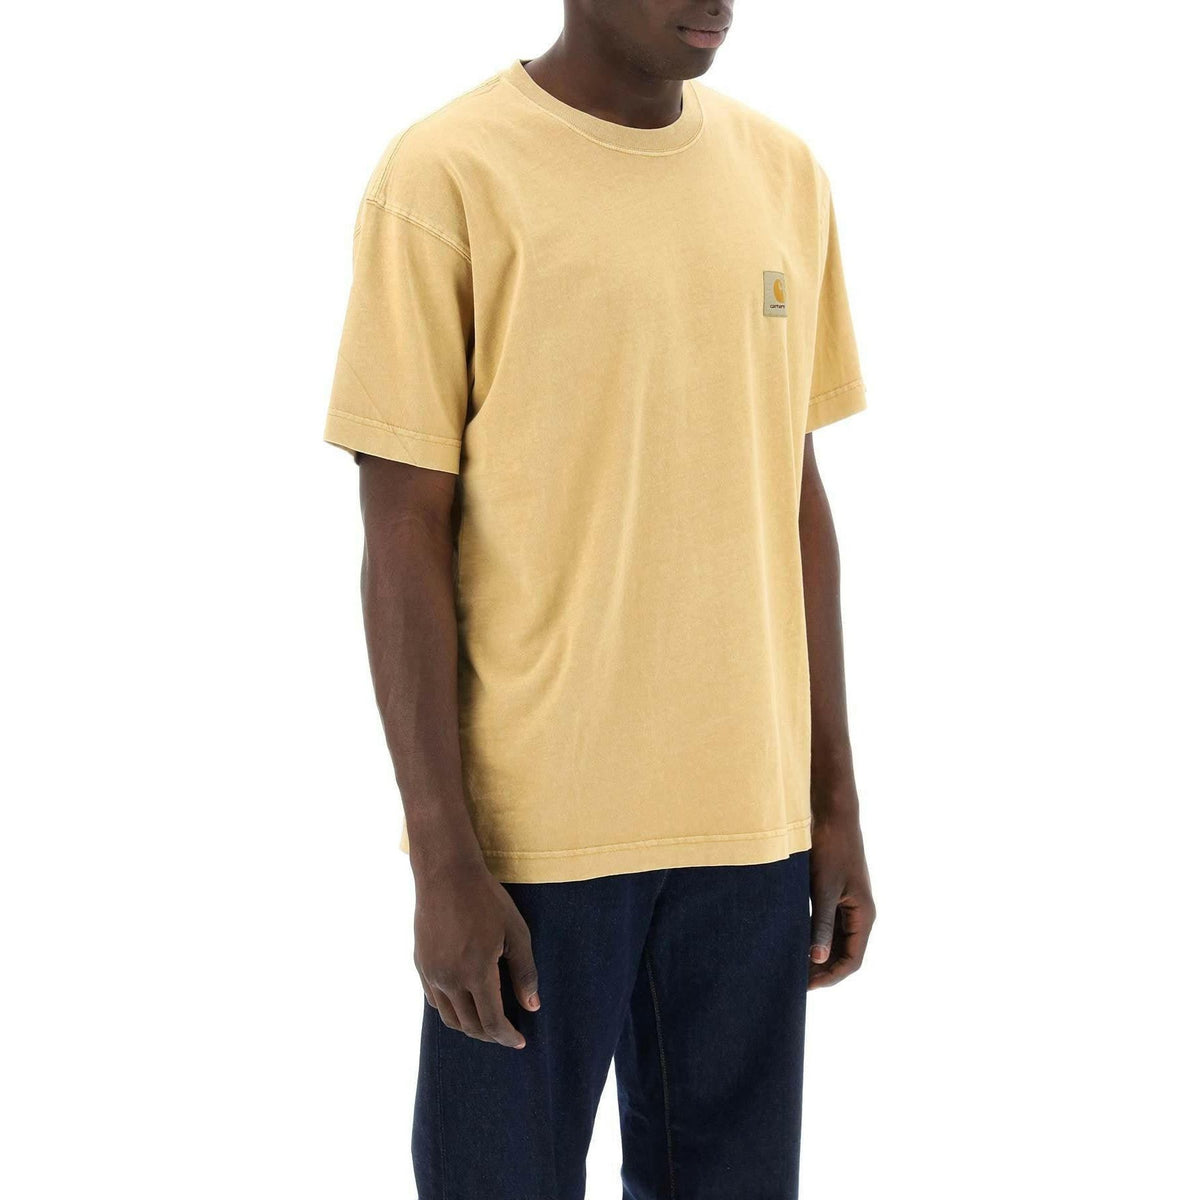 CARHARTT WIP - Bourbon Yellow Cotton Jersey T-Shirt With Lived-In Look - JOHN JULIA